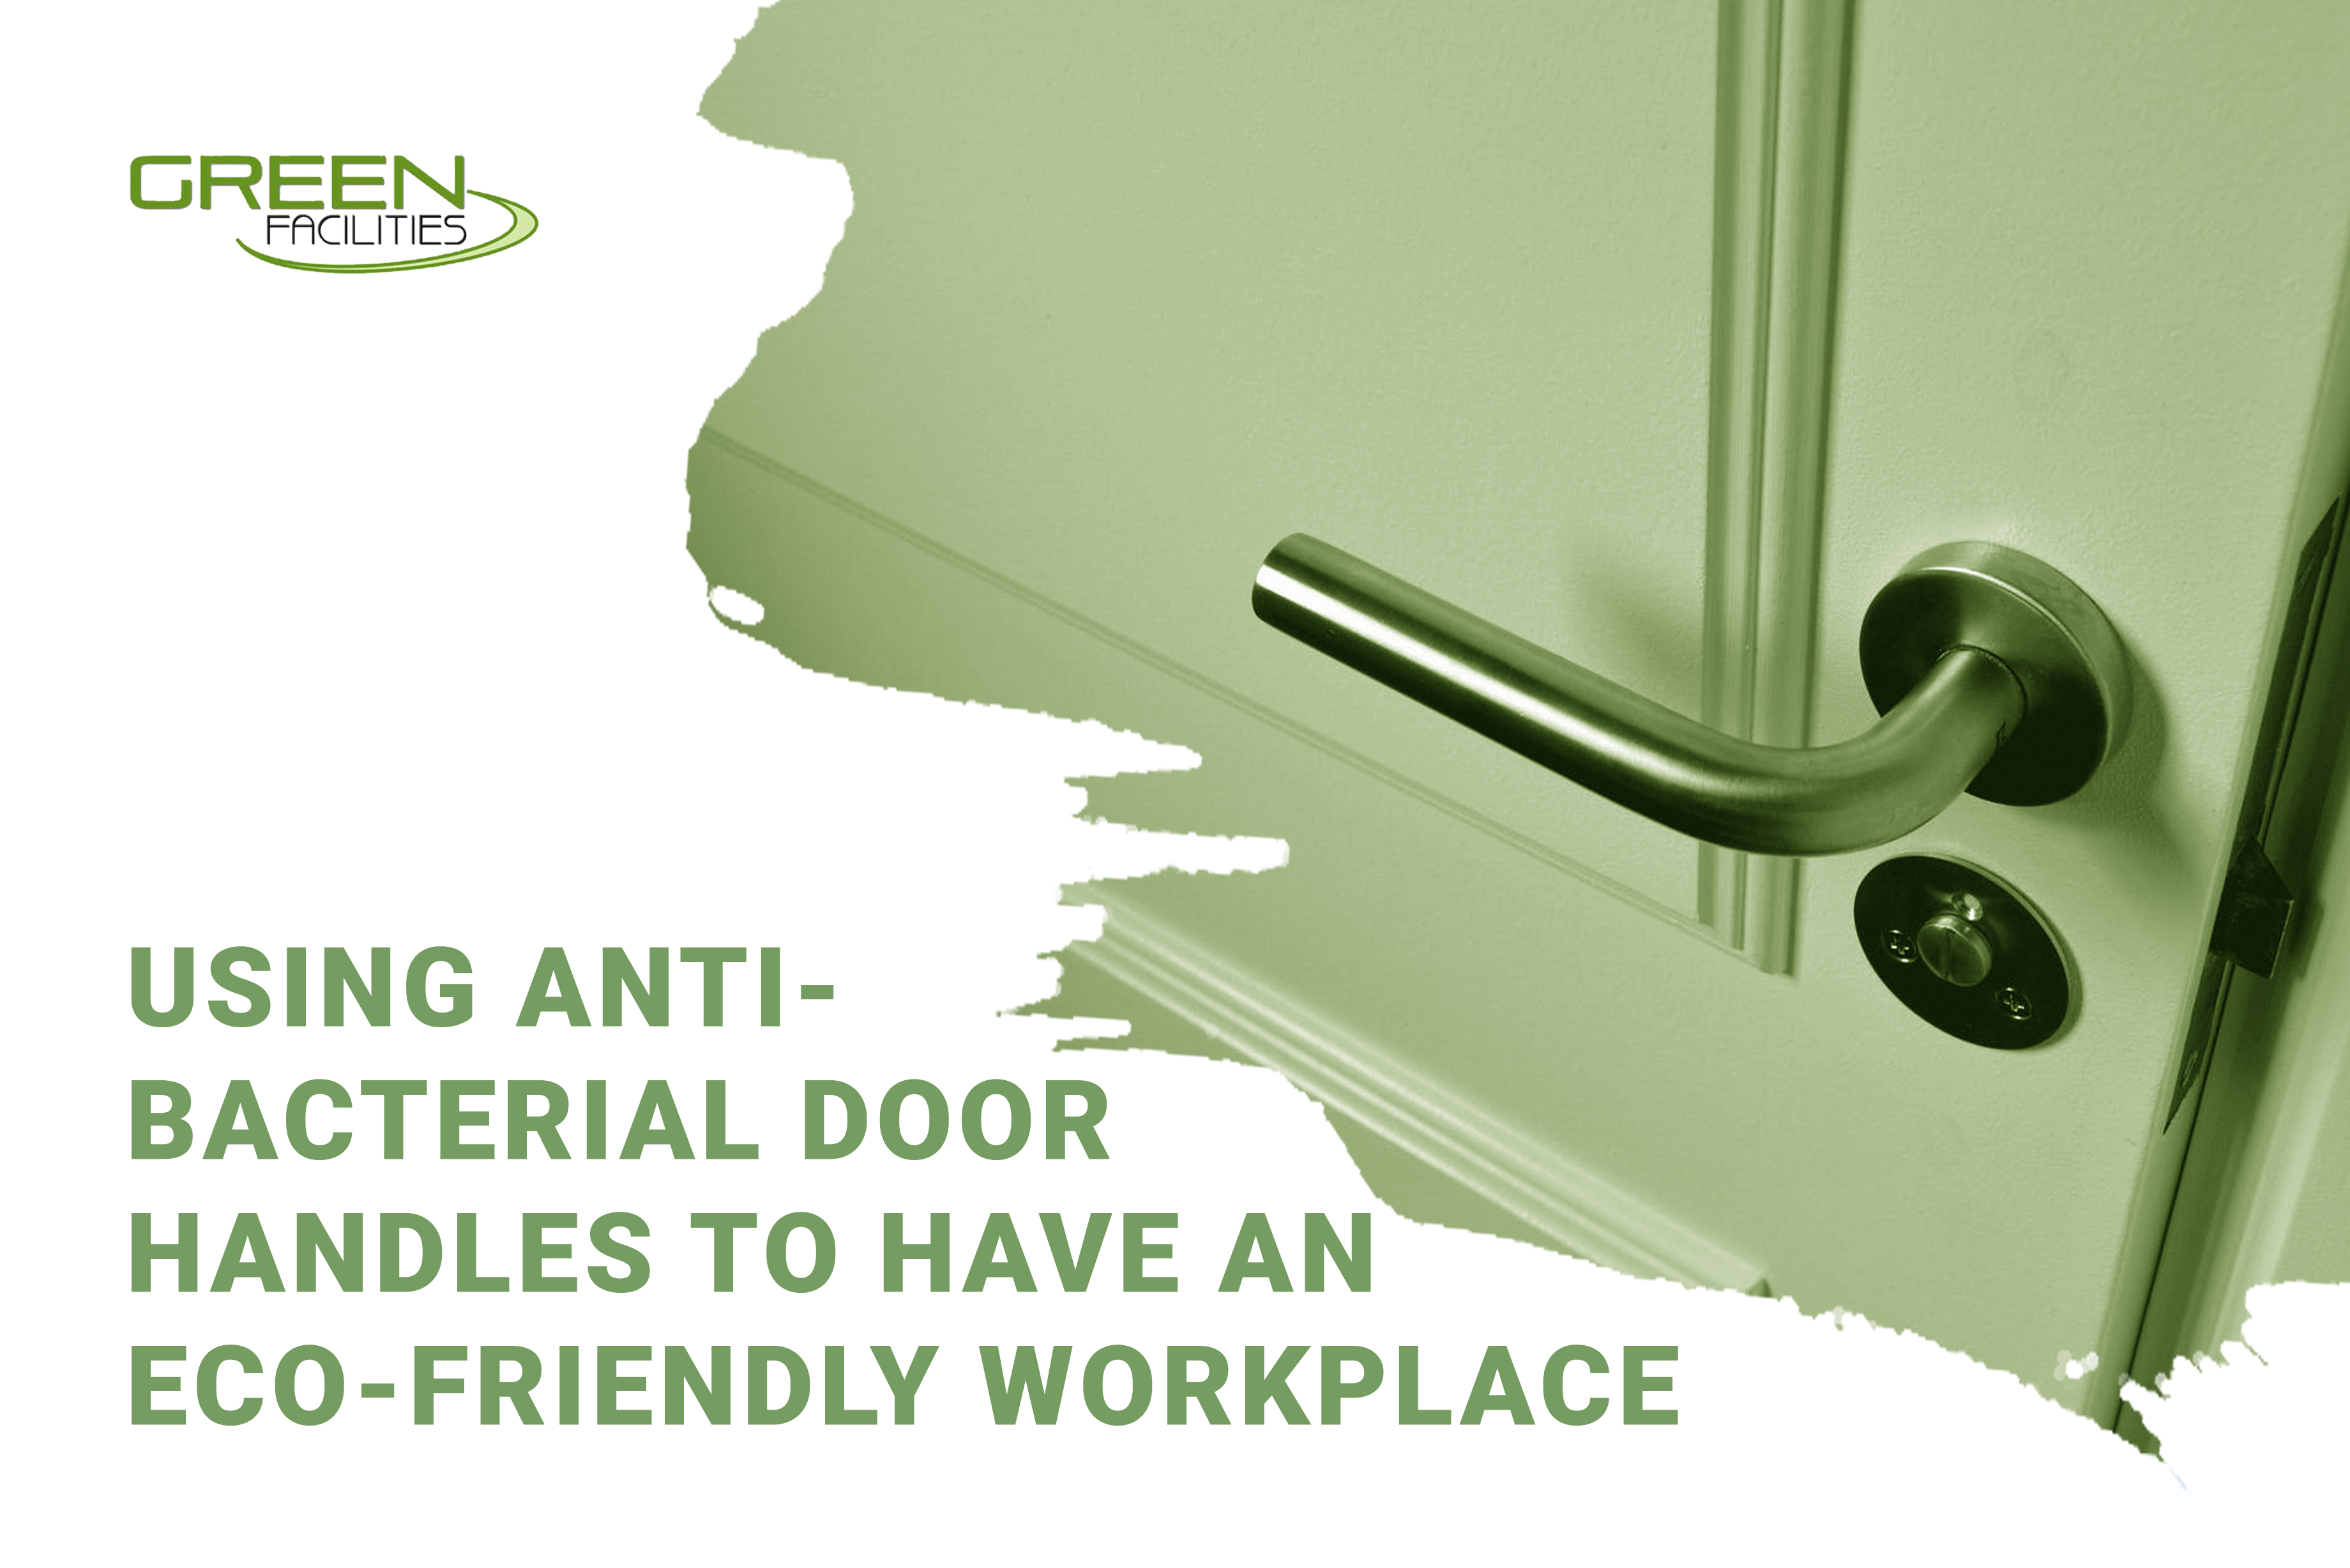 Using Antibacterial Door Handles to have an Eco-friendly Workplace